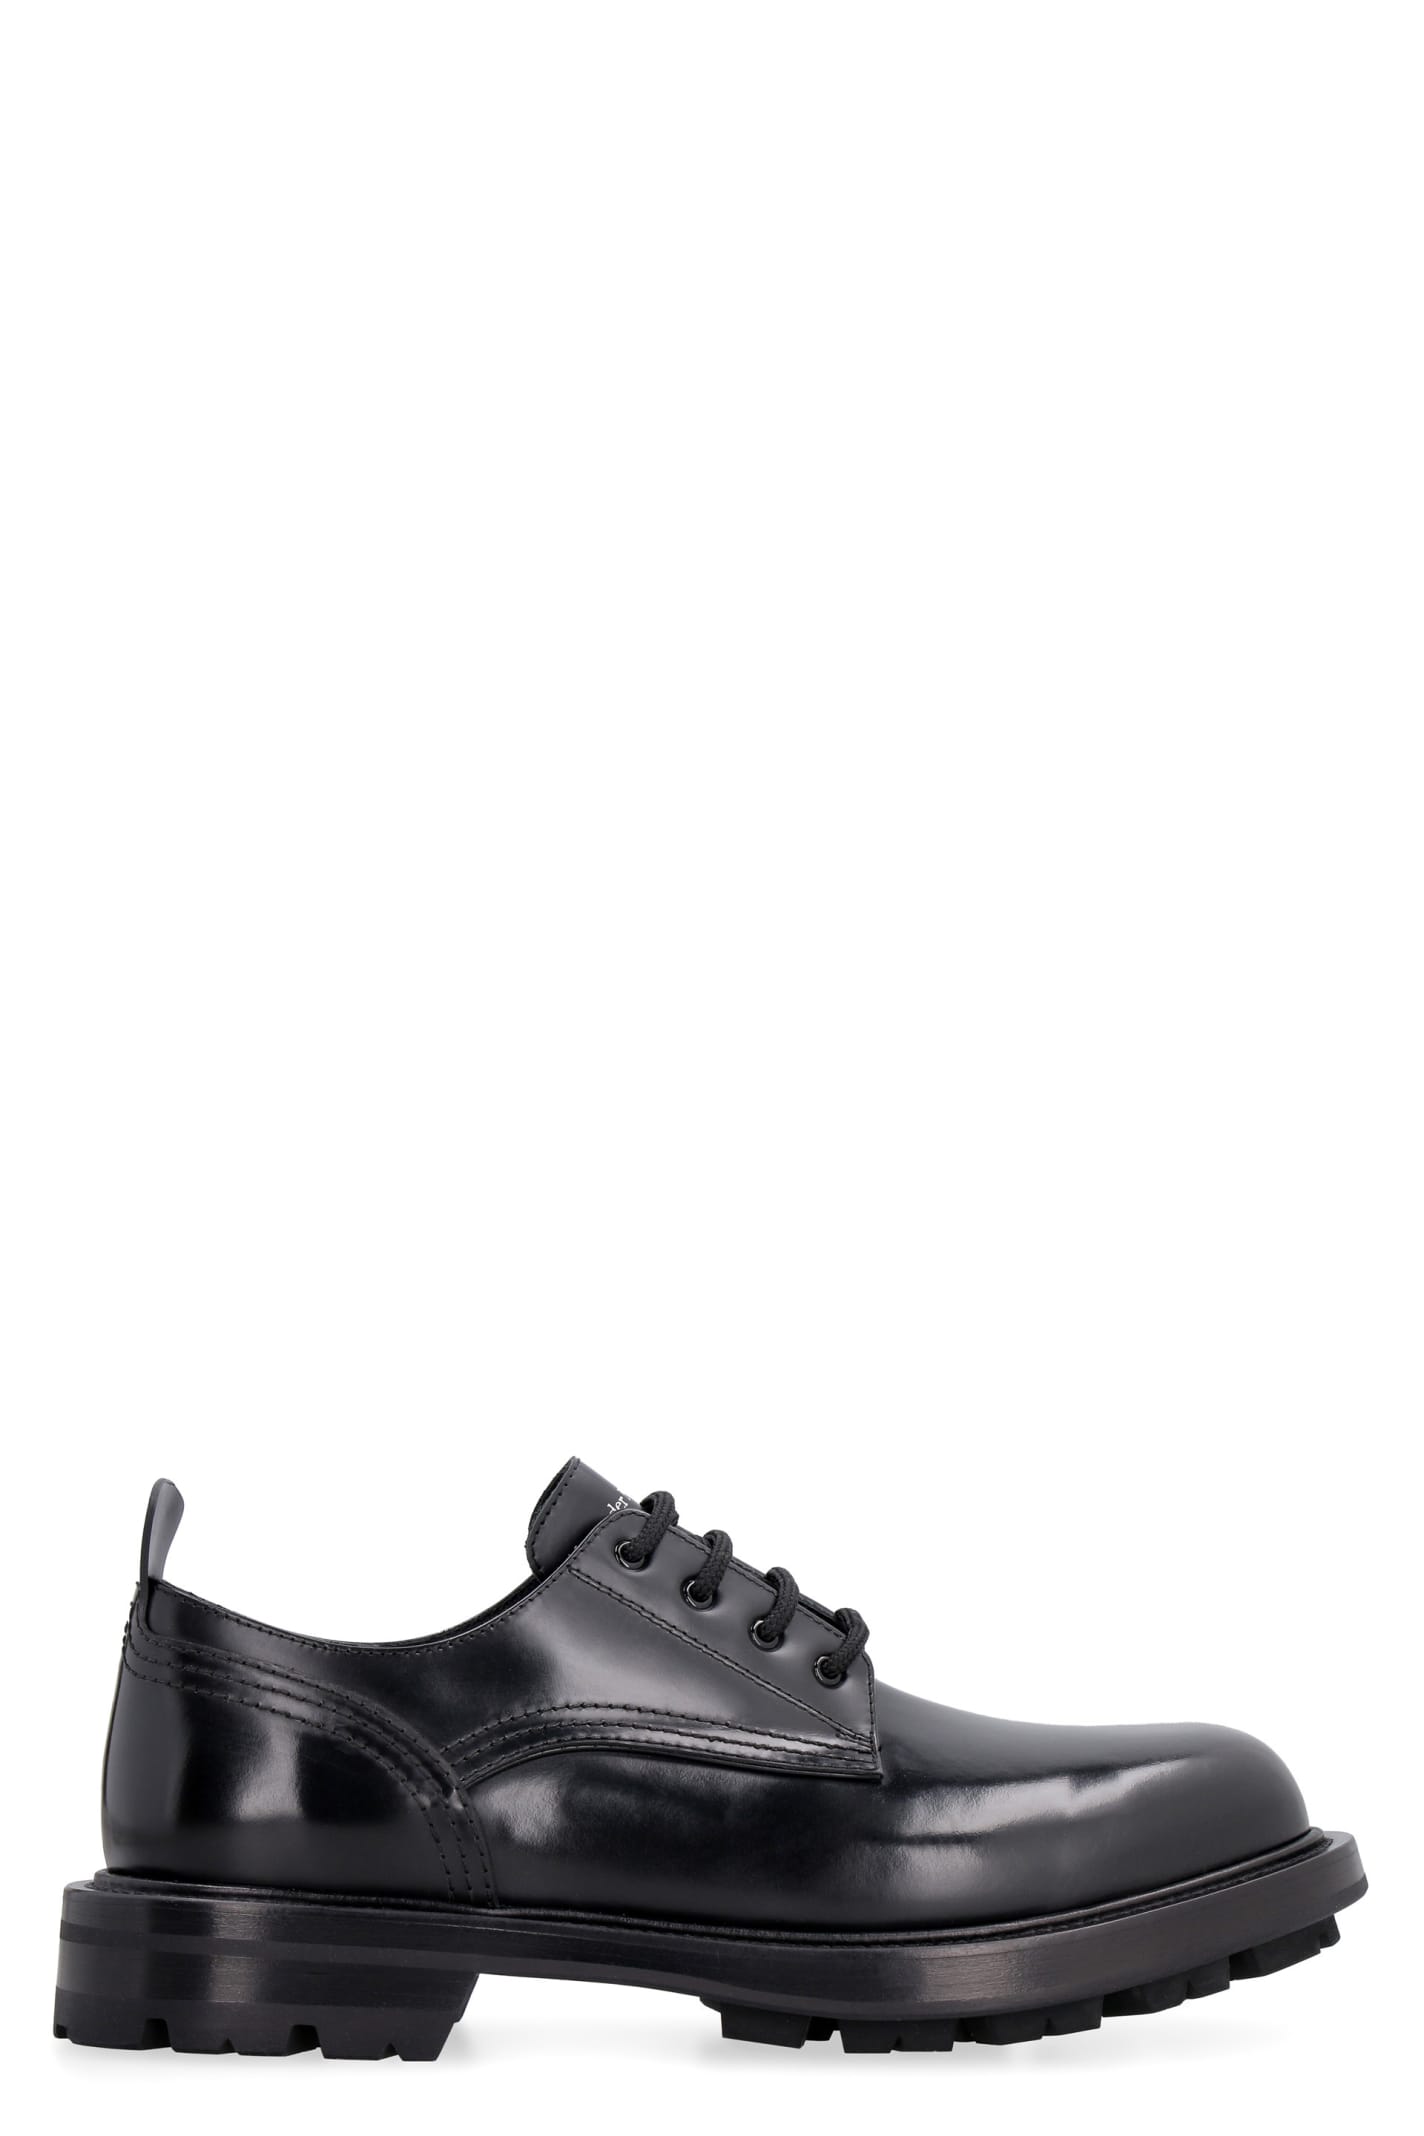 ALEXANDER MCQUEEN LEATHER LACE-UP SHOES